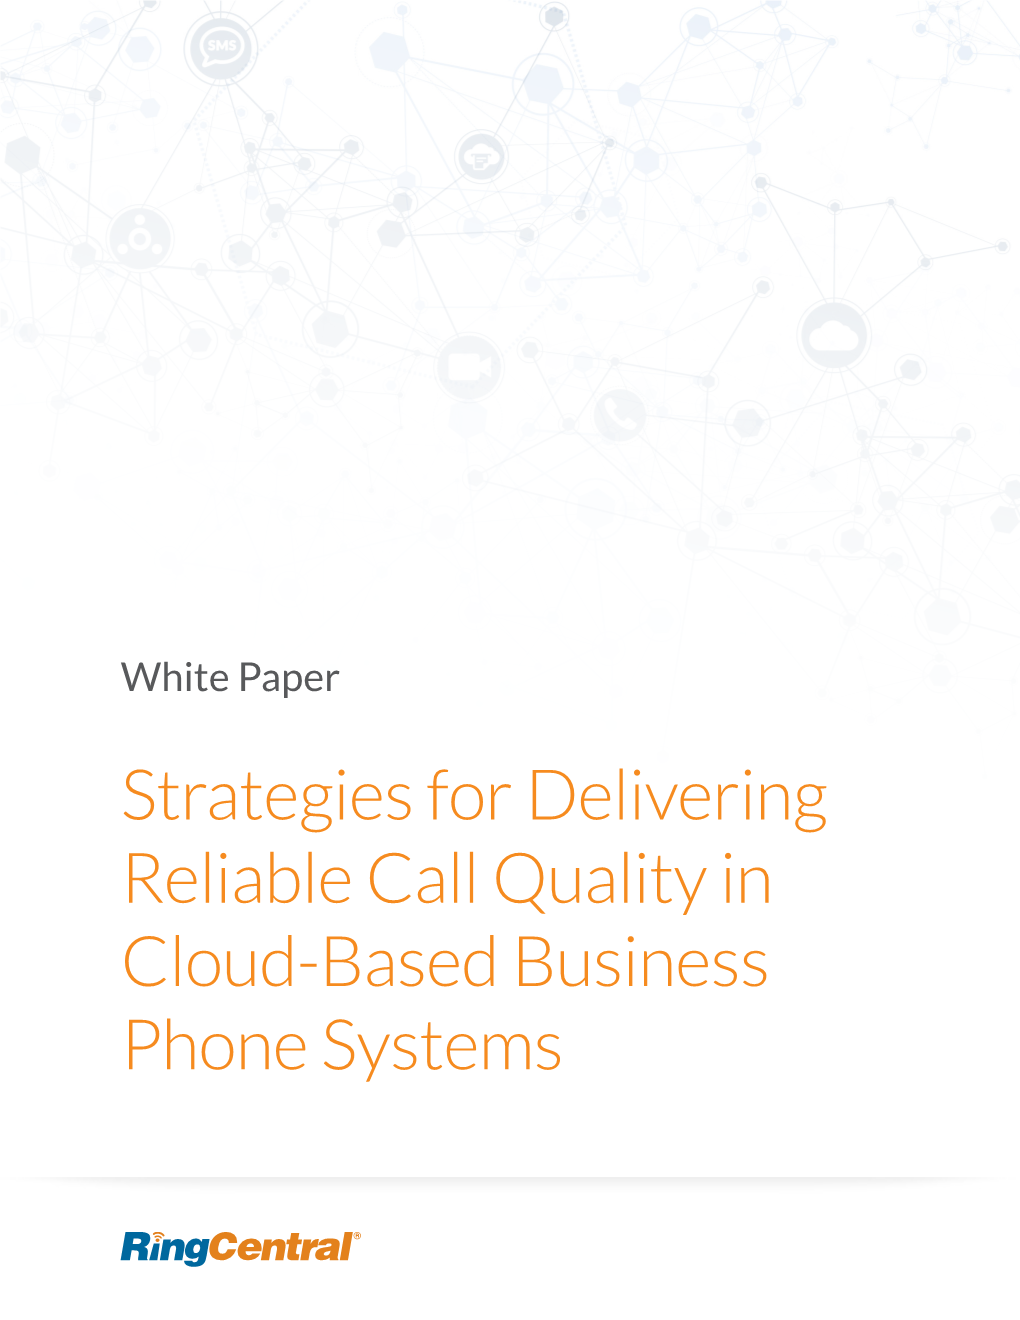 Strategies for Delivering Reliable Call Quality in Cloud-Based Business Phone Systems Ringcentral® White Paper | Strategies for Delivering Reliable Call Quality